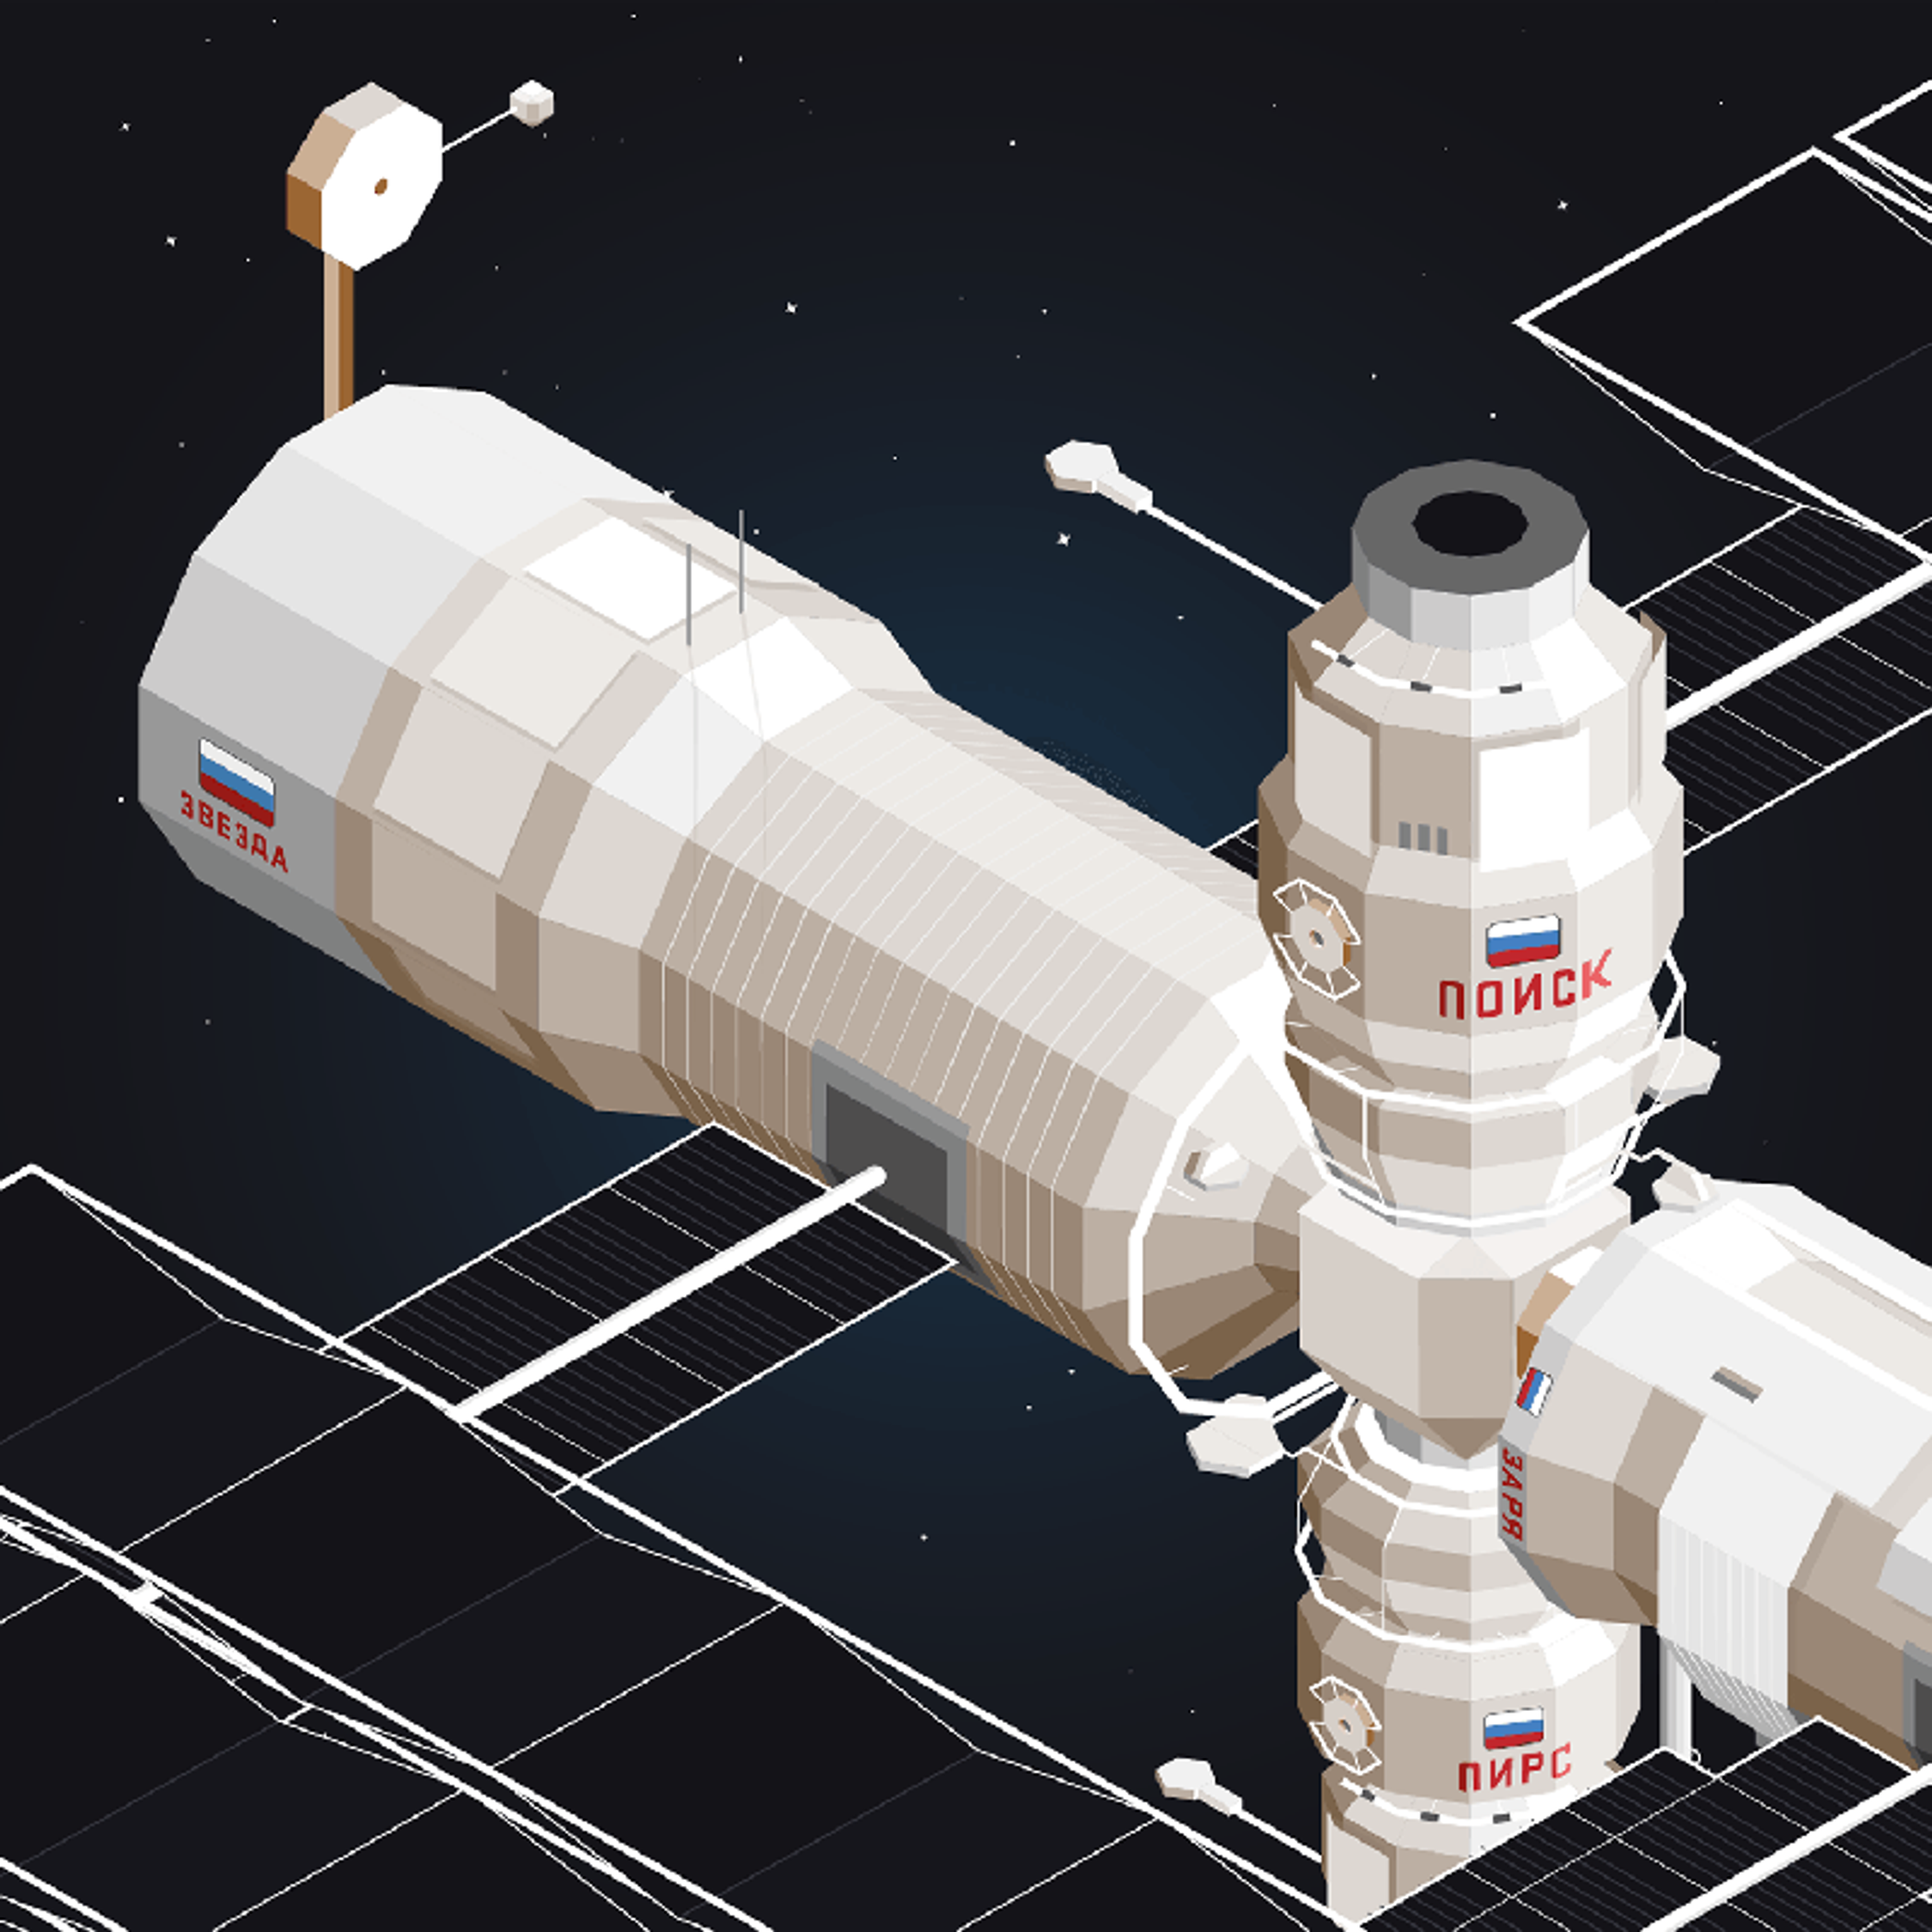 A low-poly illustation of the Russian modules of the international space station attatched together in space.